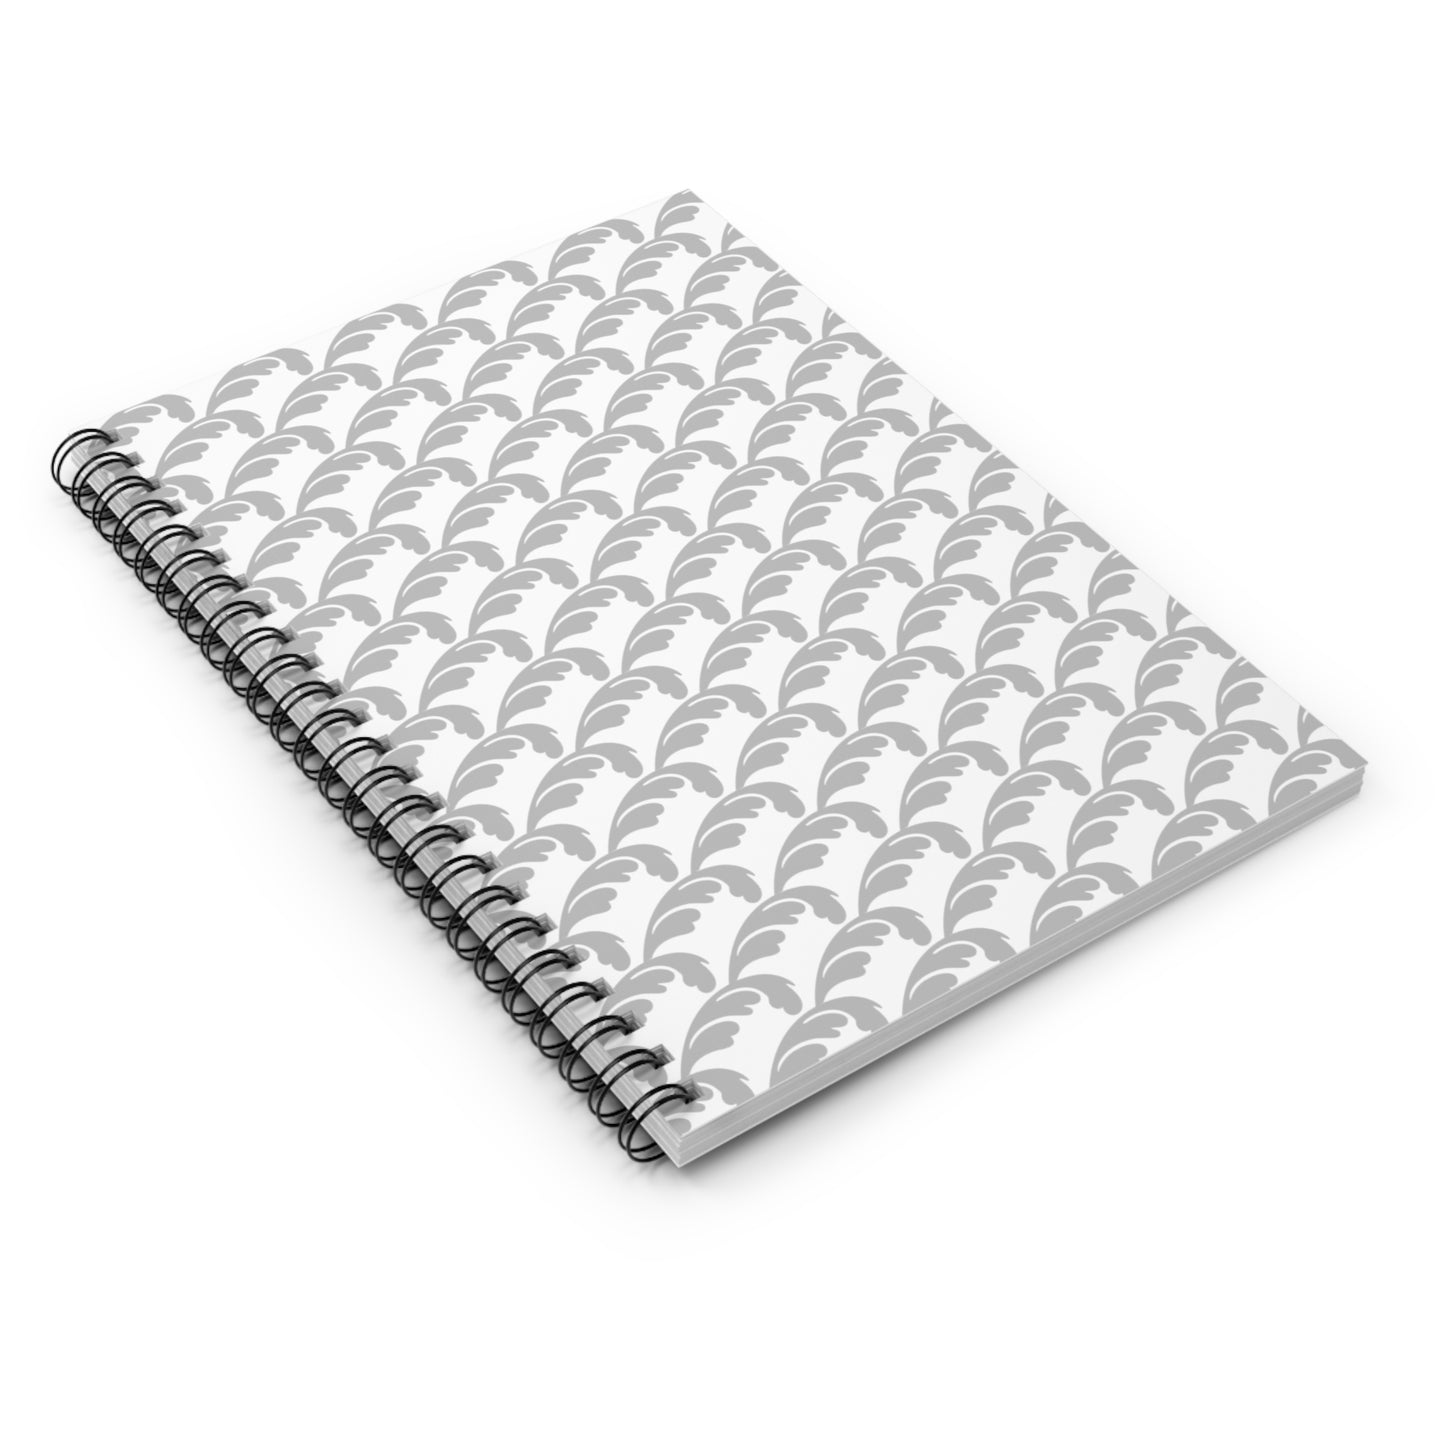 Beautiful Beloved One - Spiral Notebook - Ruled Line - silver/wht